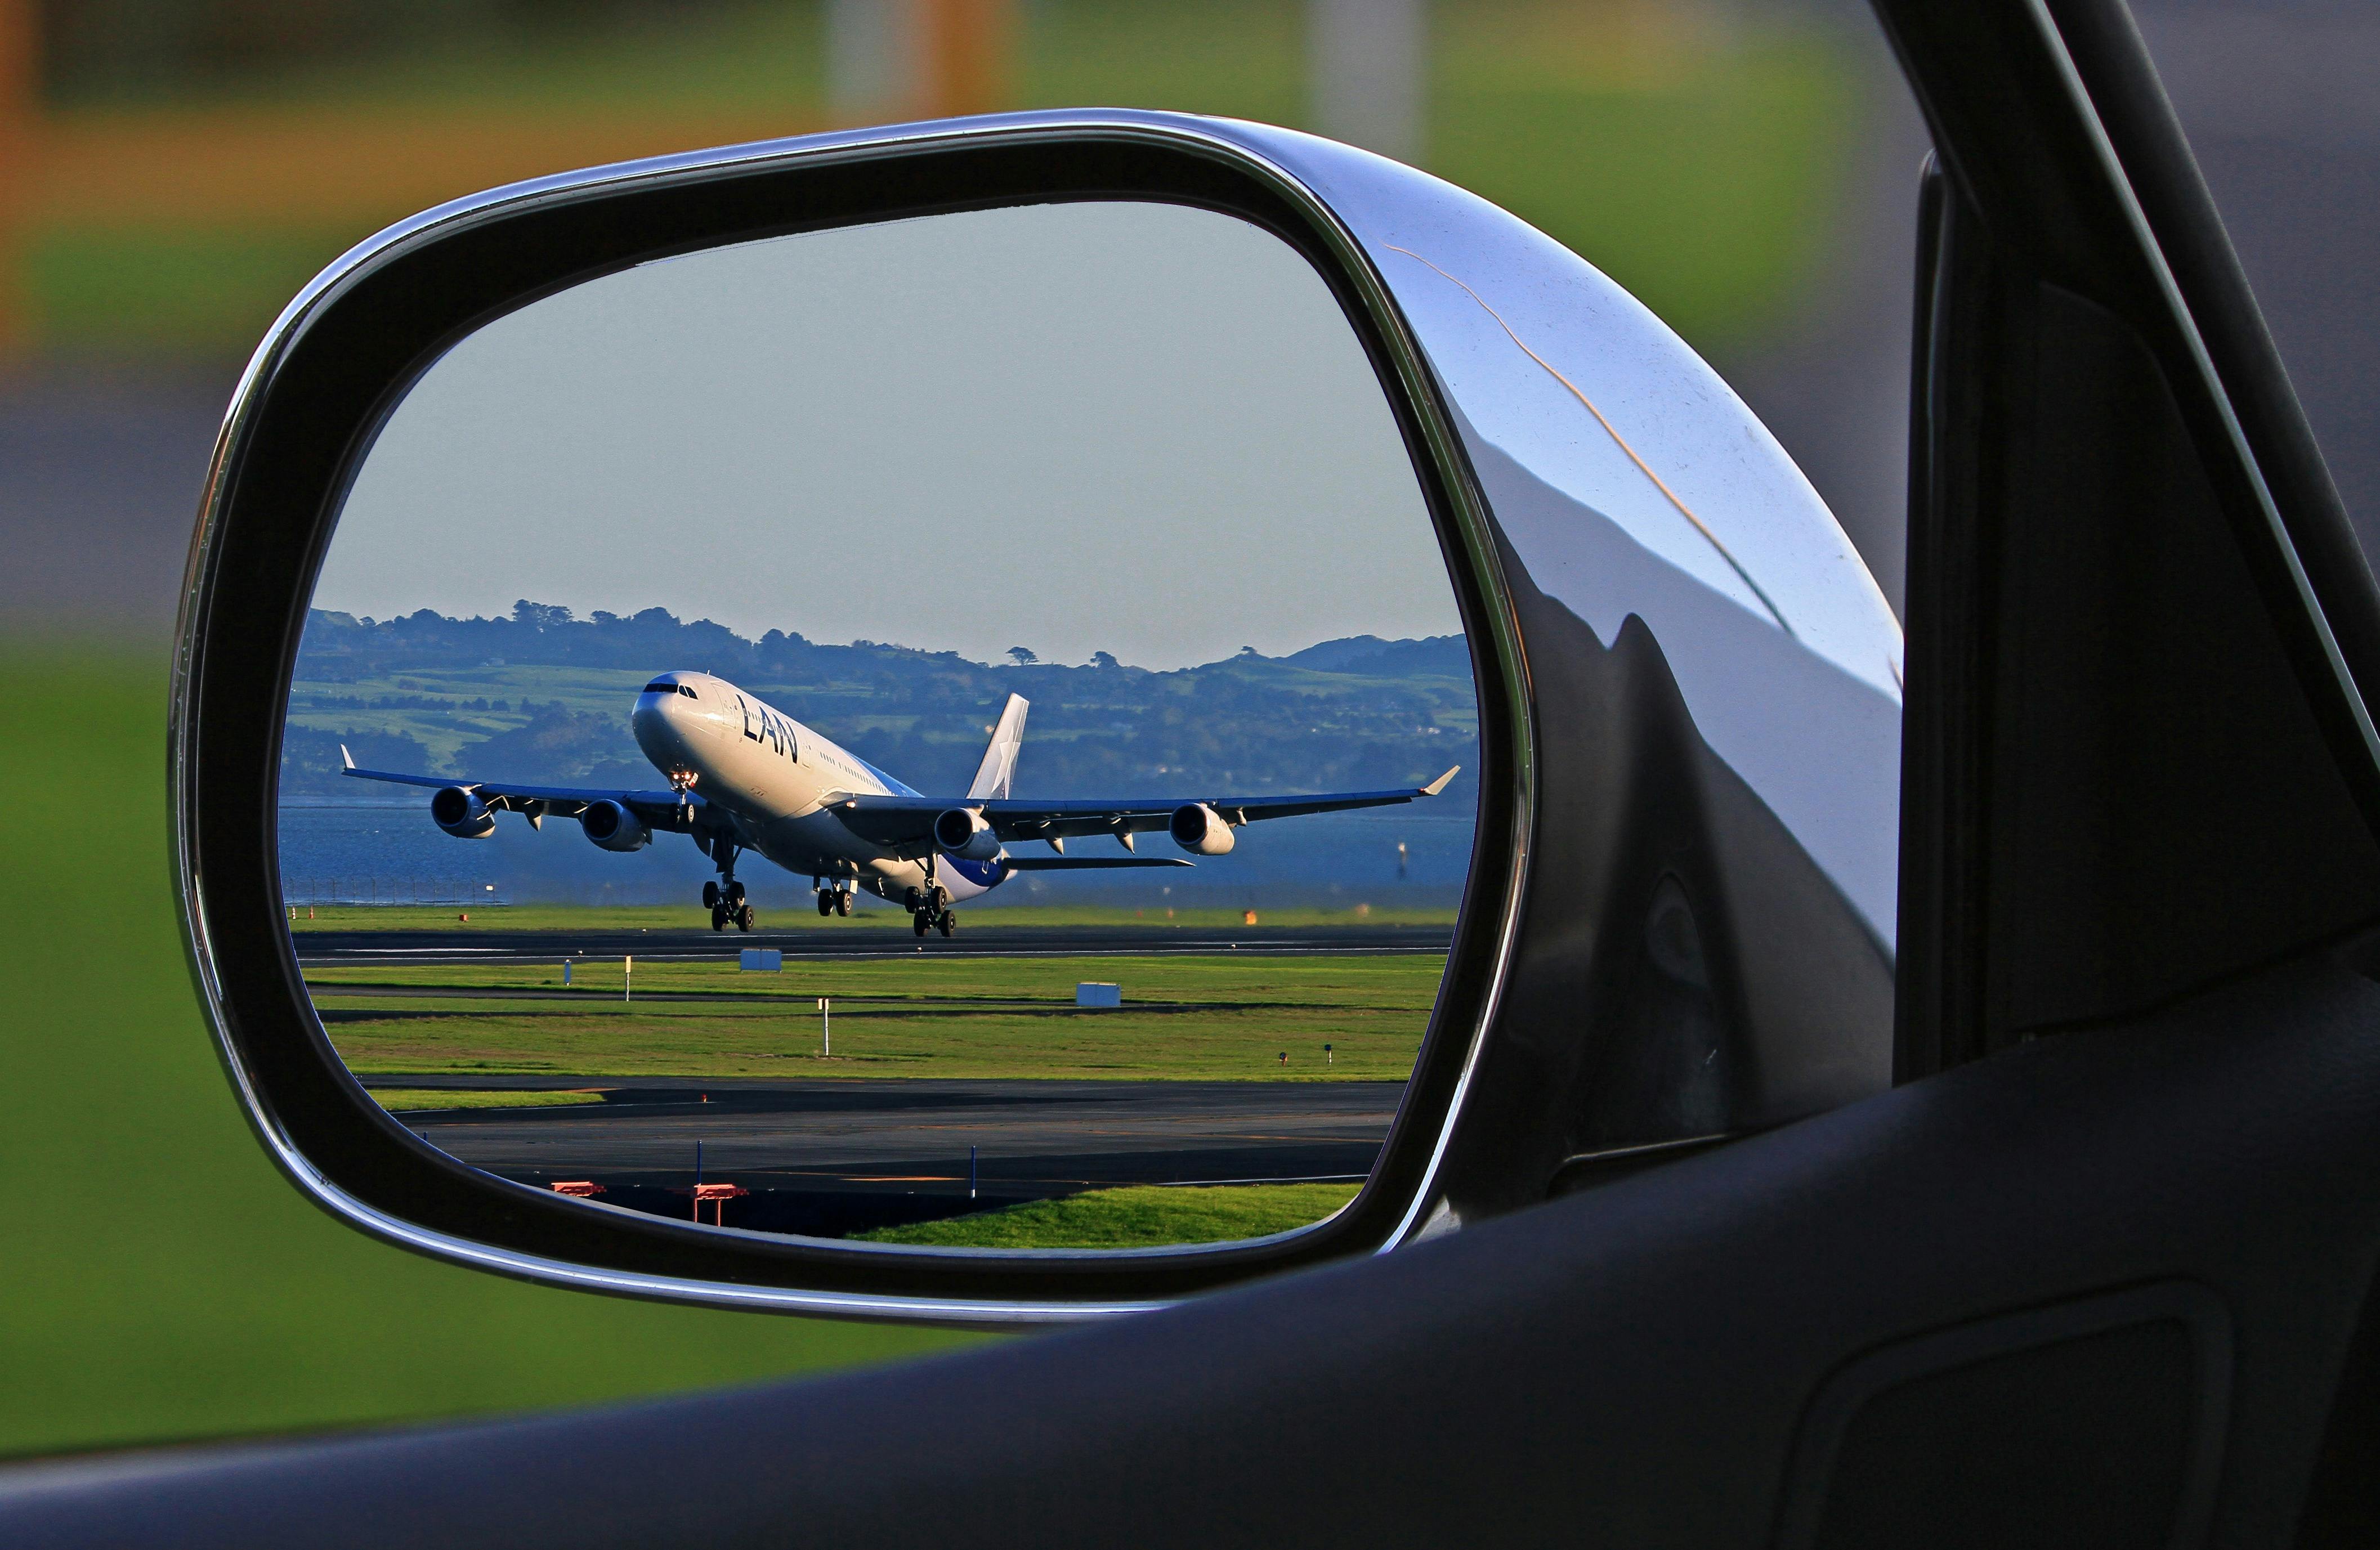 Airport Runway Photos, Download The BEST Free Airport Runway Stock Photos &  HD Images